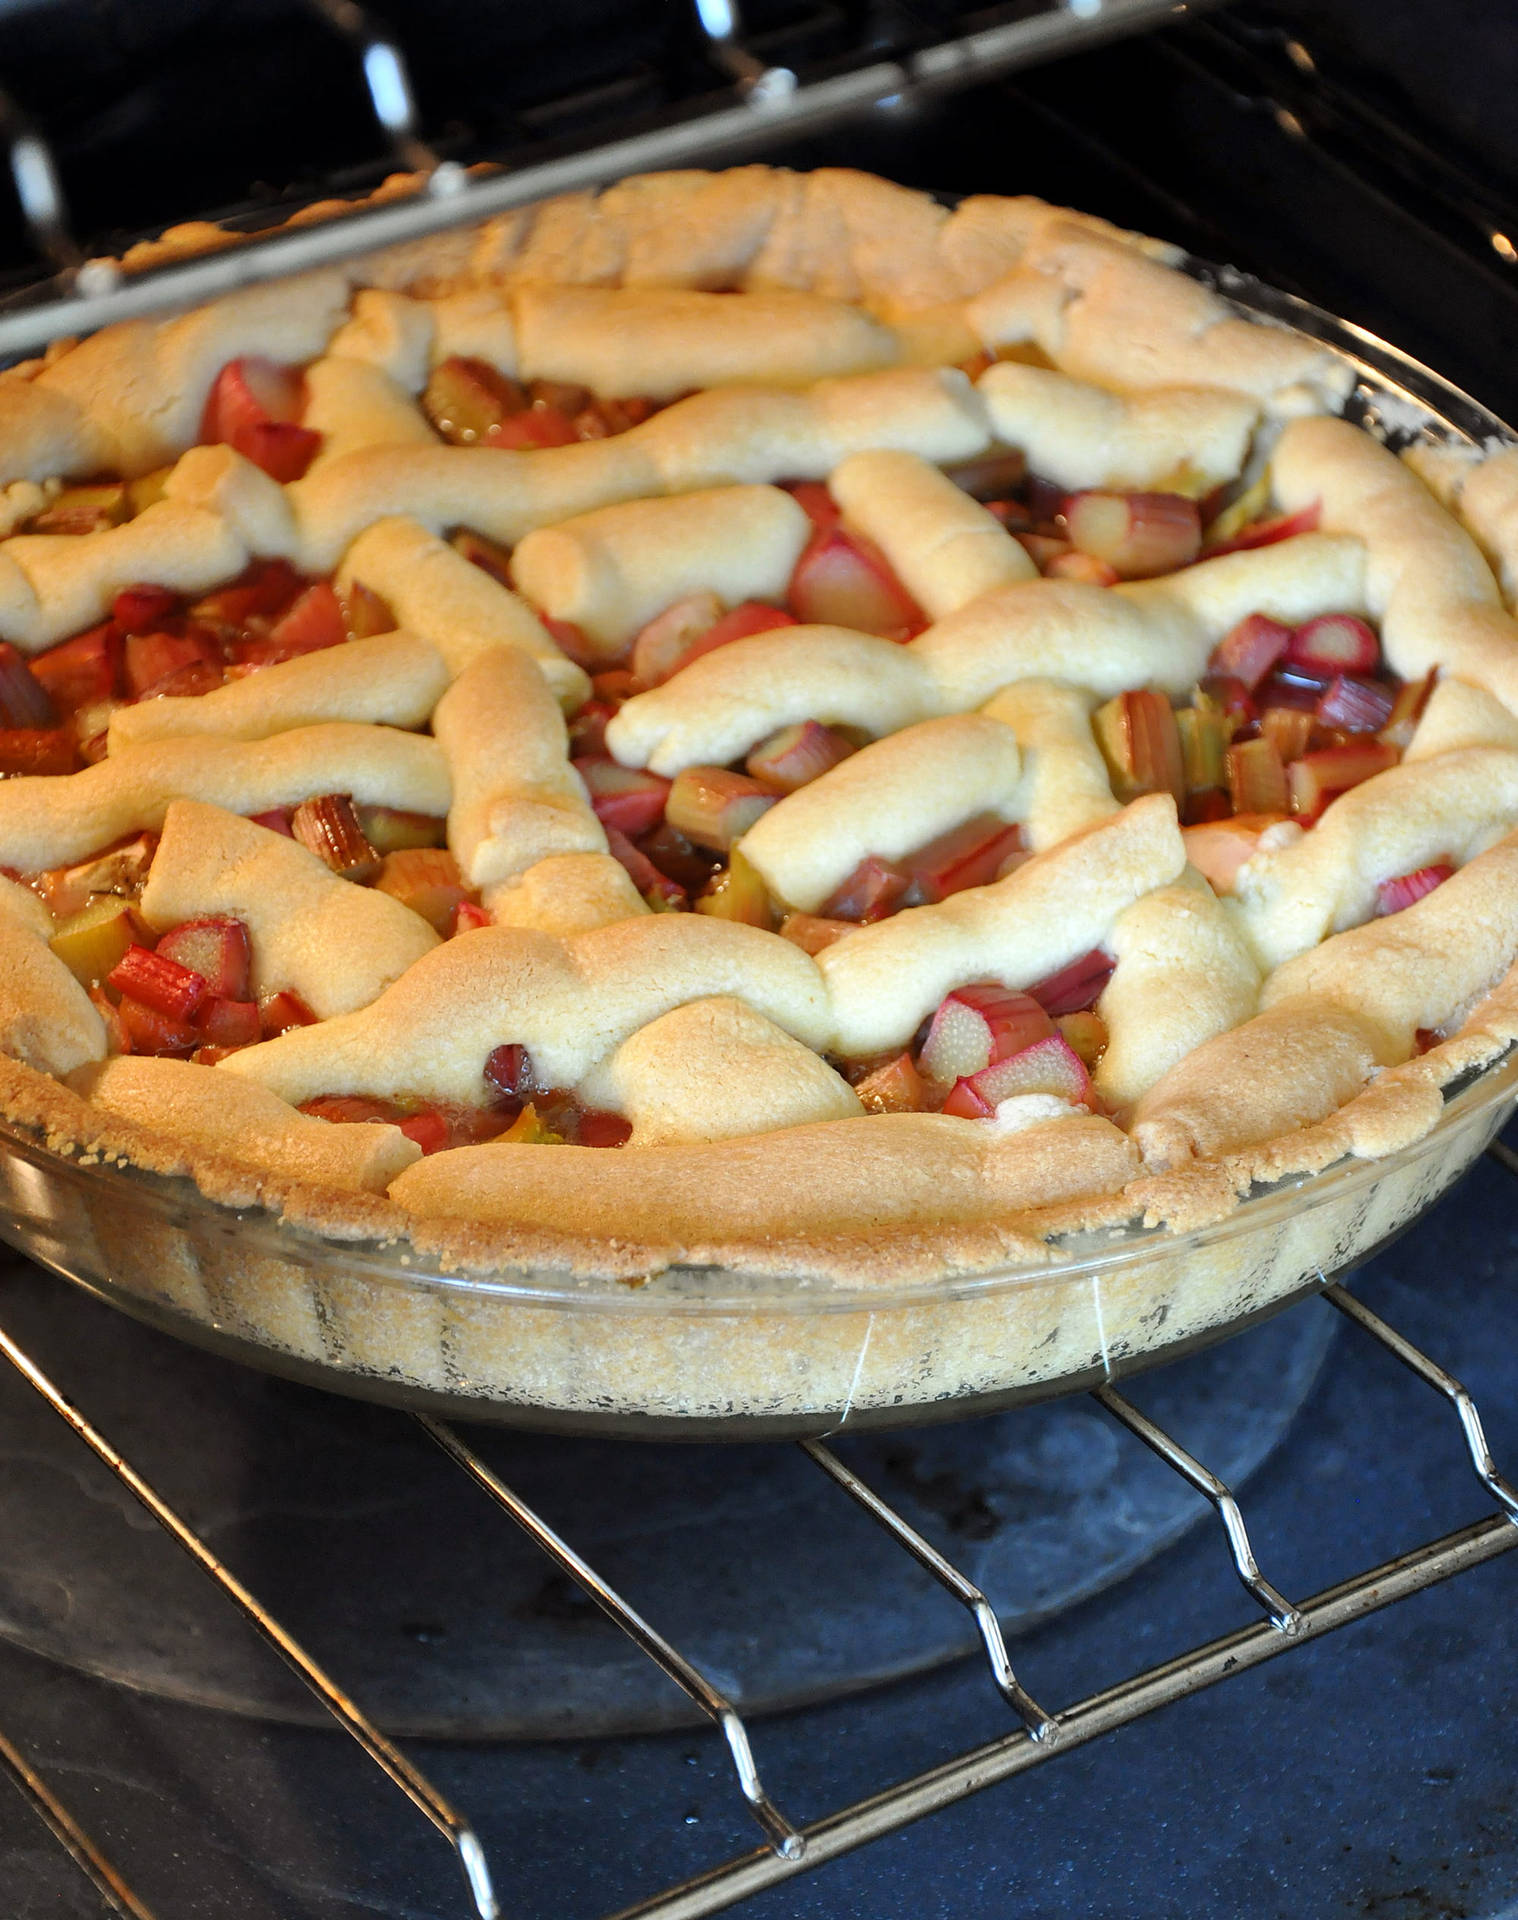 Strawberry Rhubarb Pie In The Oven Wallpaper